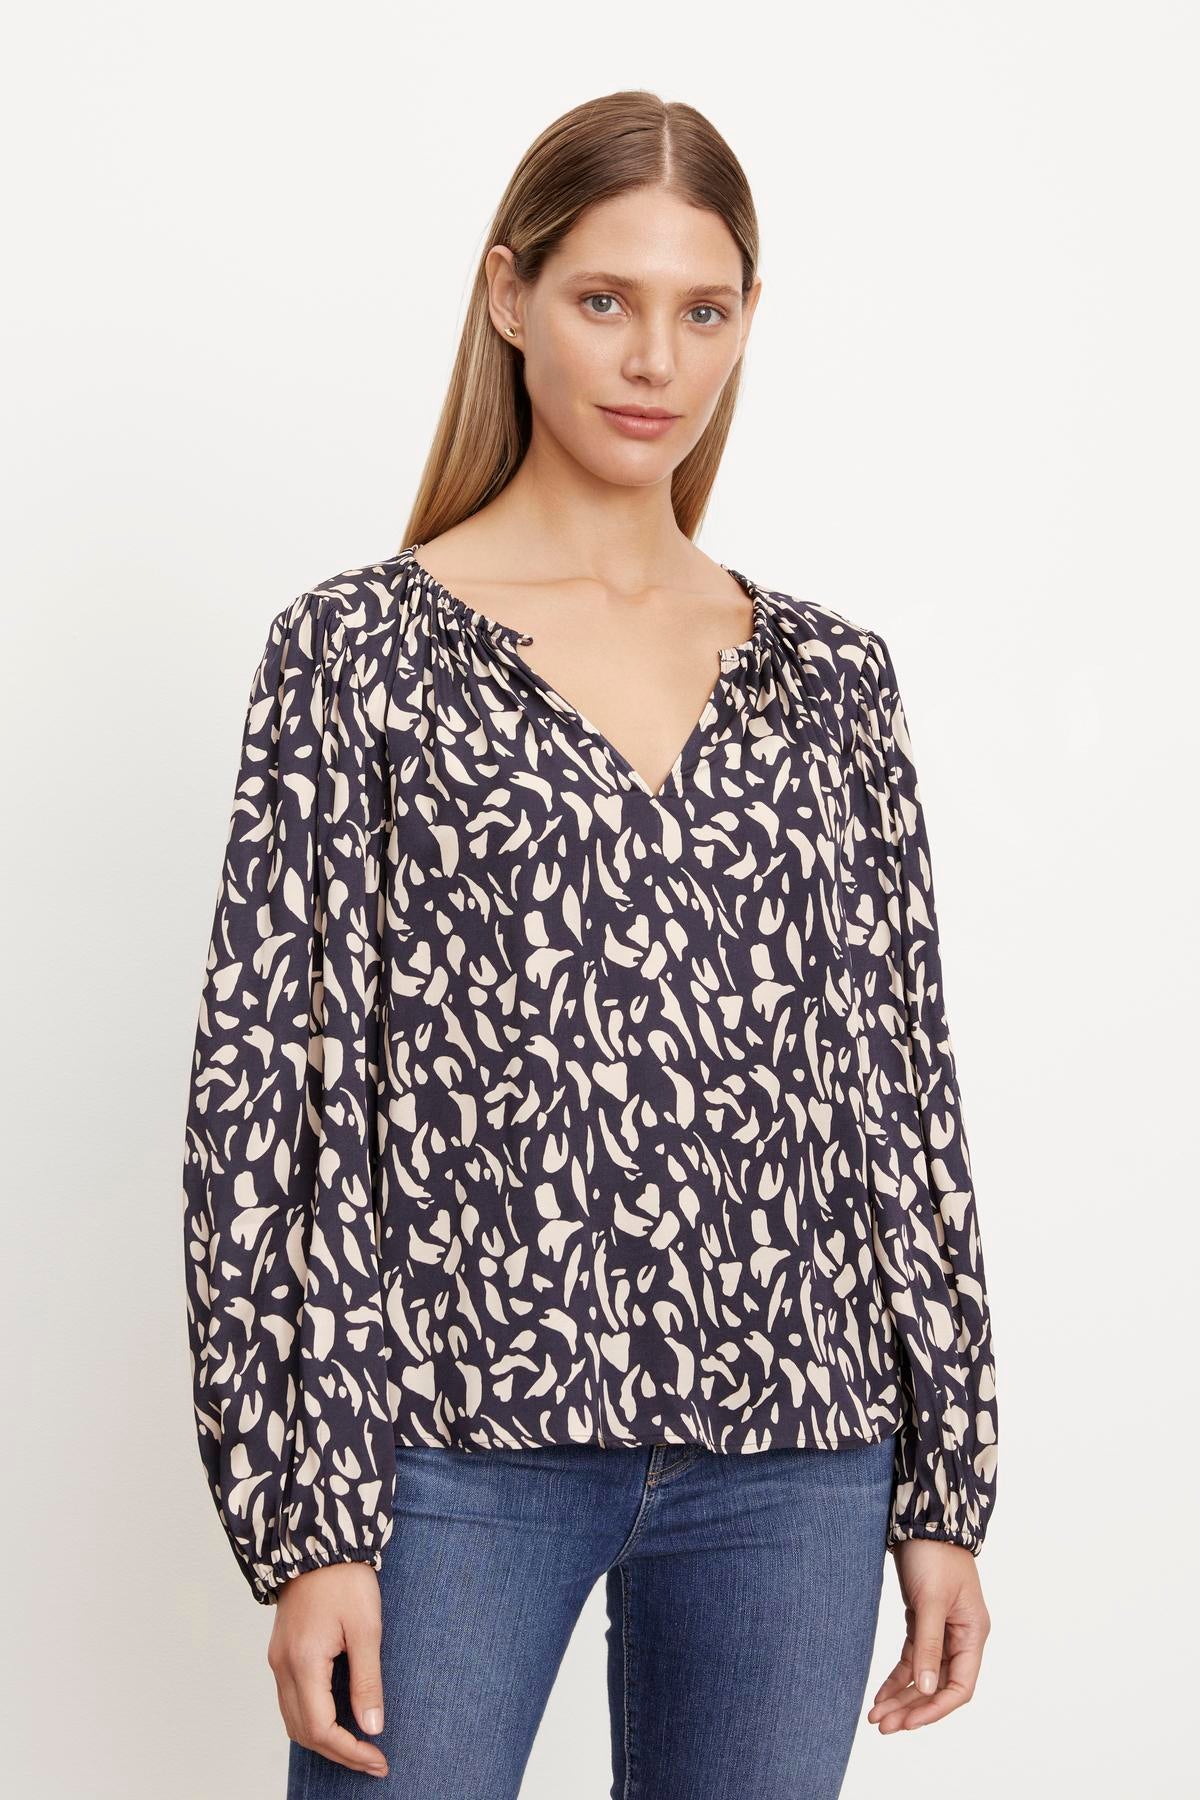 A woman wearing jeans and a KADE PRINTED PEASANT BLOUSE by Velvet by Graham & Spencer with an animal print.-36094325981377